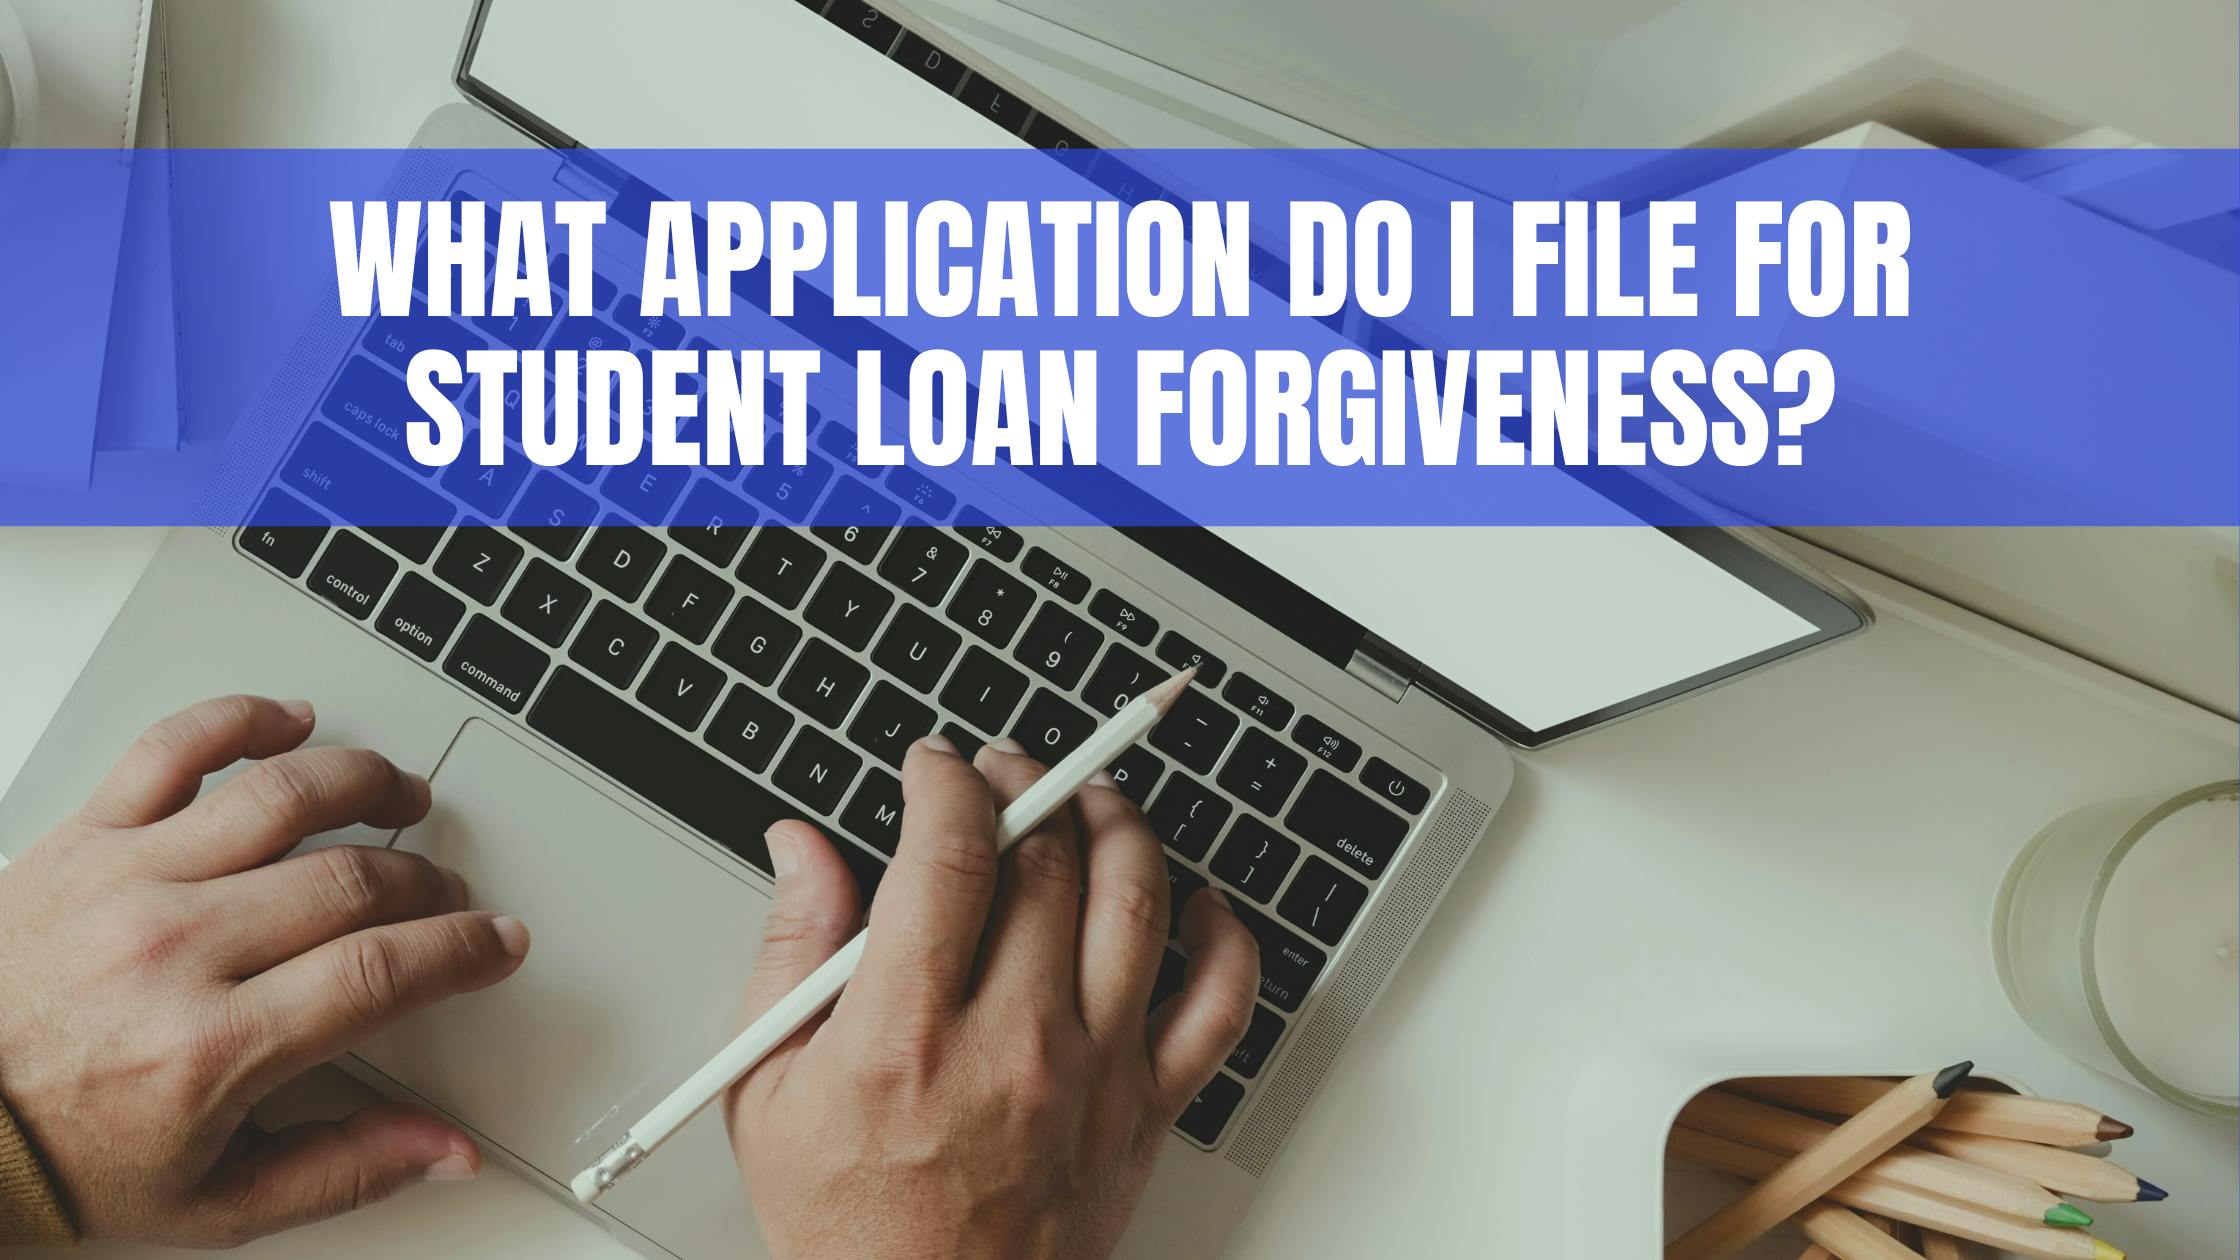 What application do I file for student loan forgiveness?